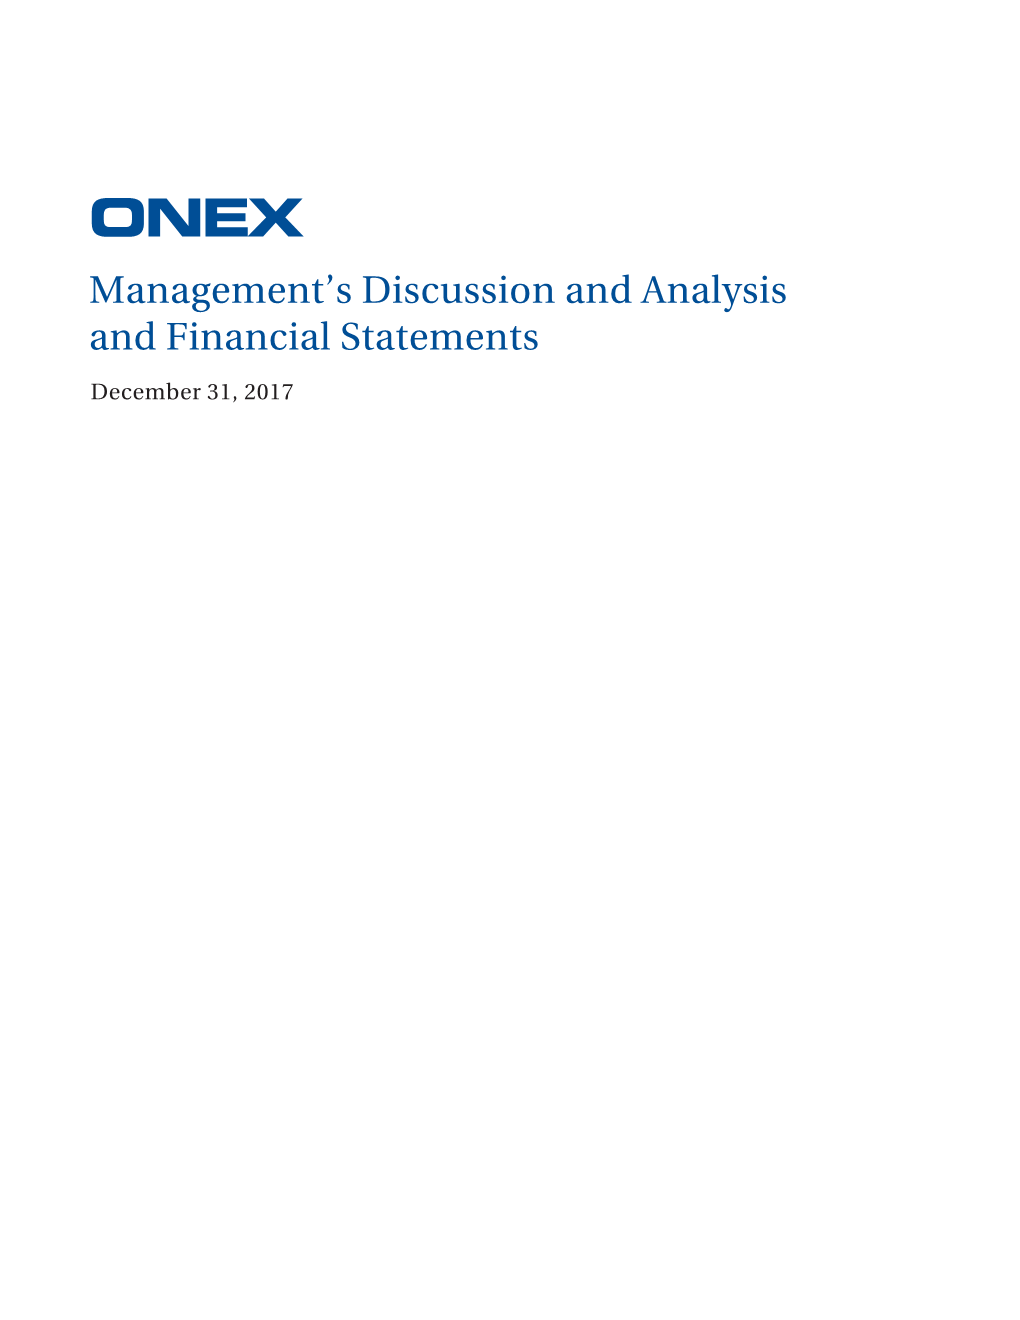 Management's Discussion and Analysis and Financial Statements